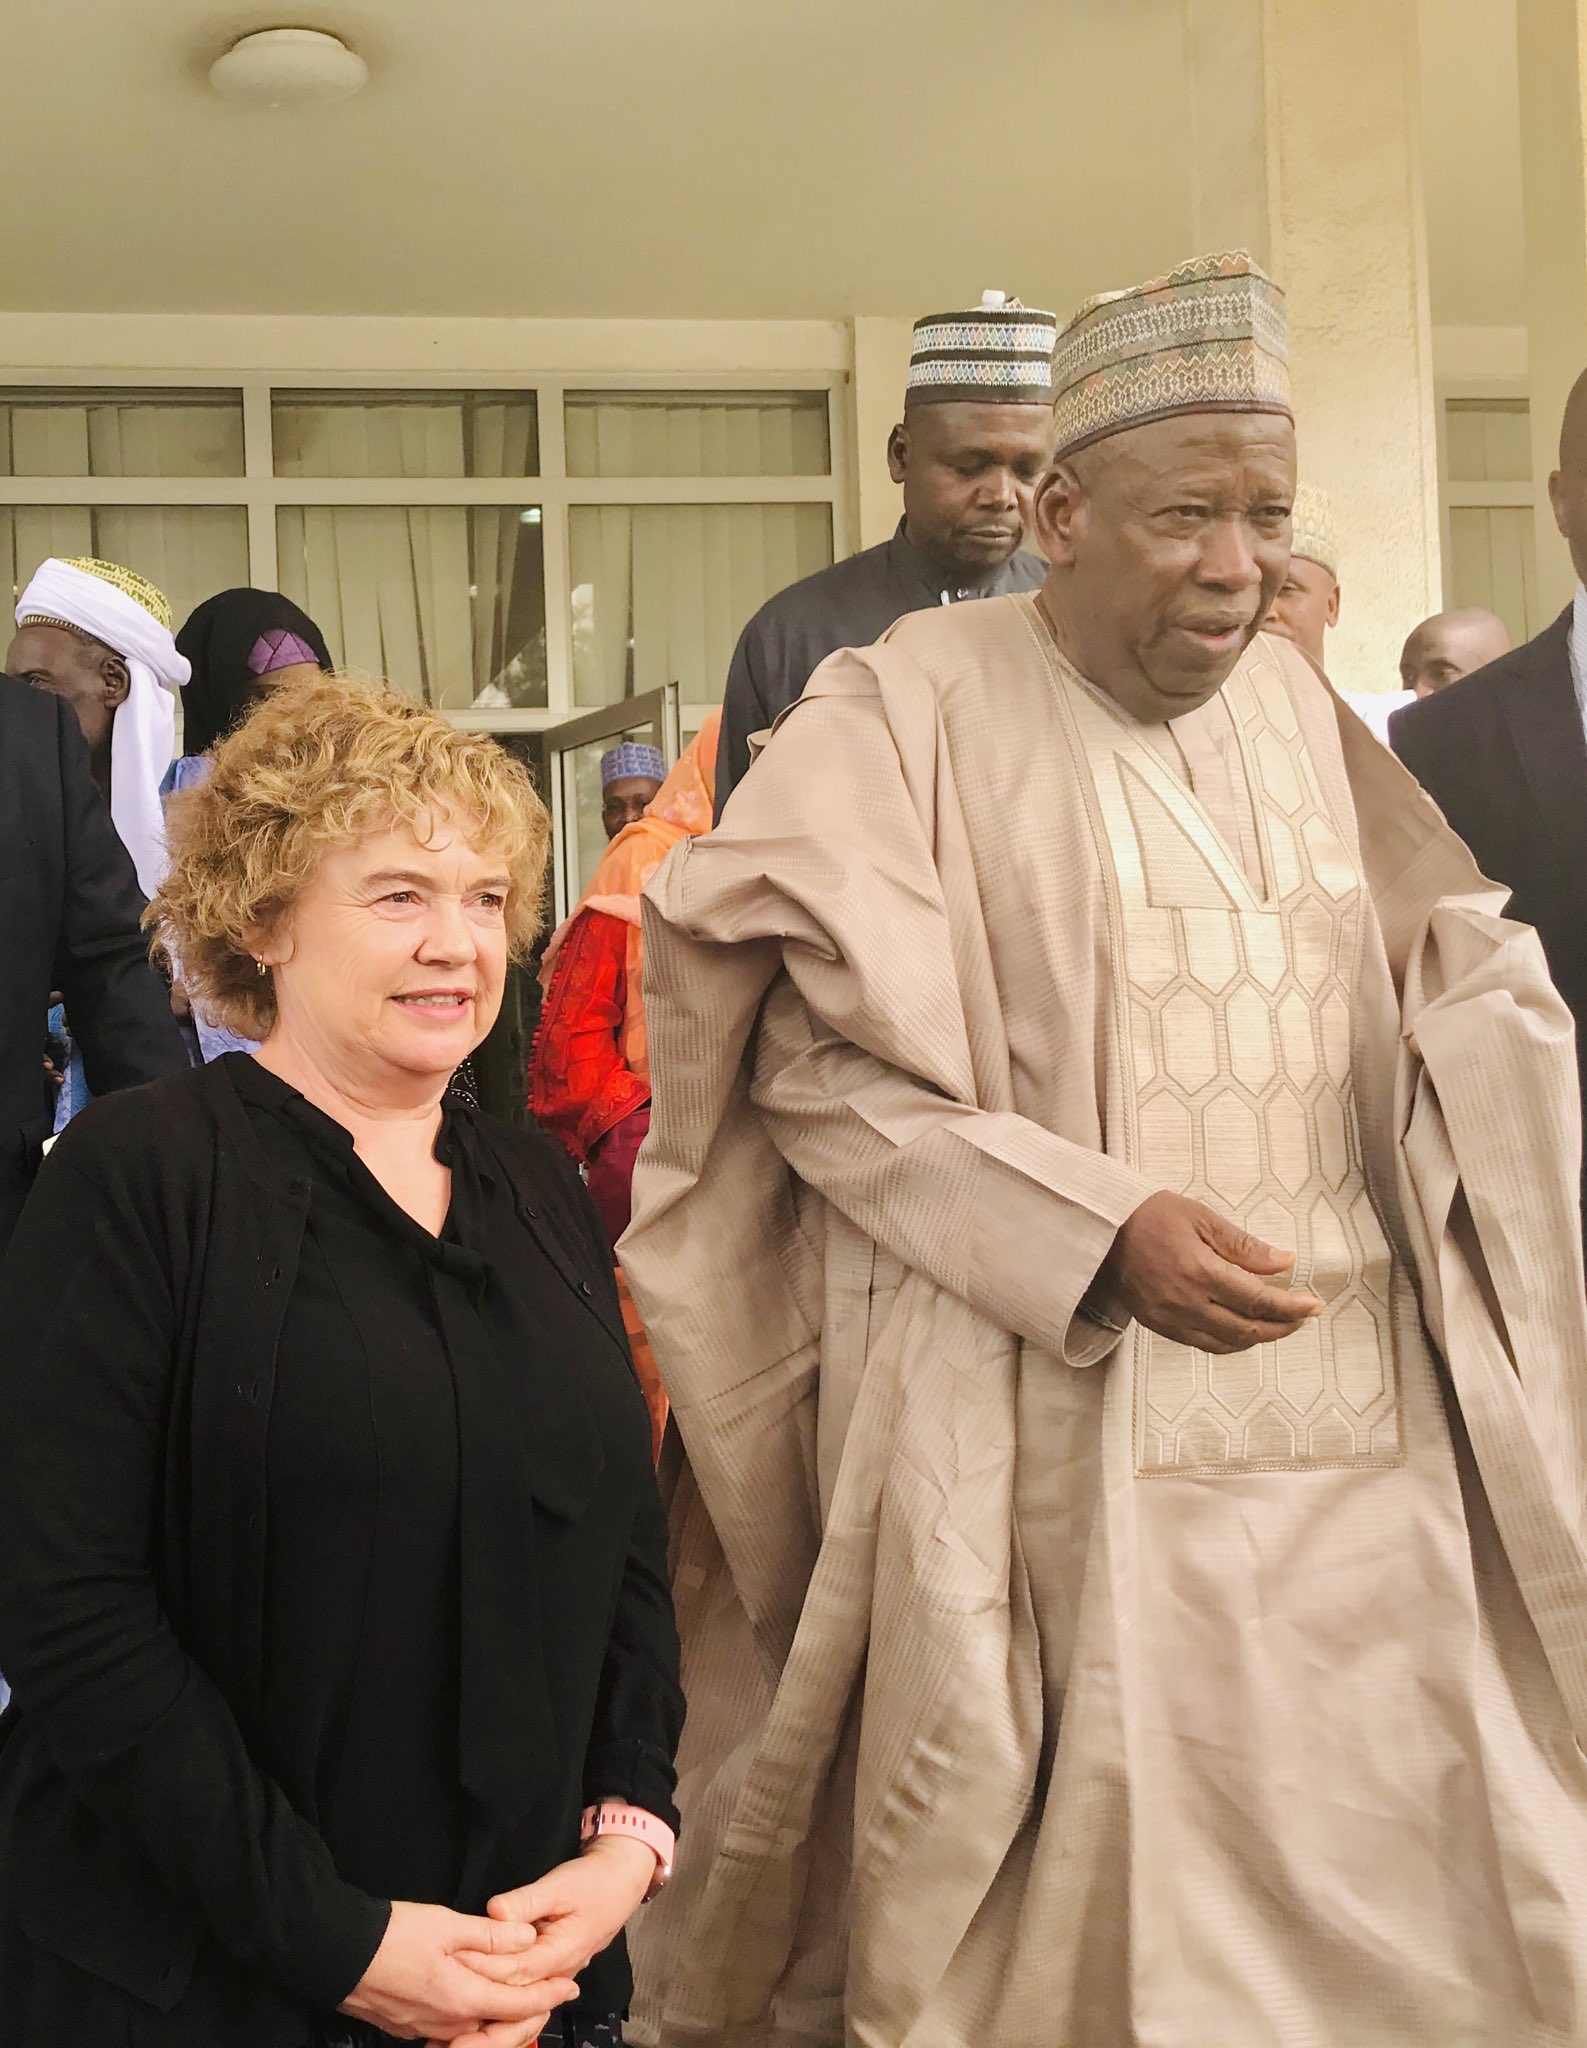 British High Commissioner to Nigeria, Catriona Laing meets Governor Abdullahi Ganduje and member of his cabinet in Kano. [Twitter/@CatrionaLaing1]